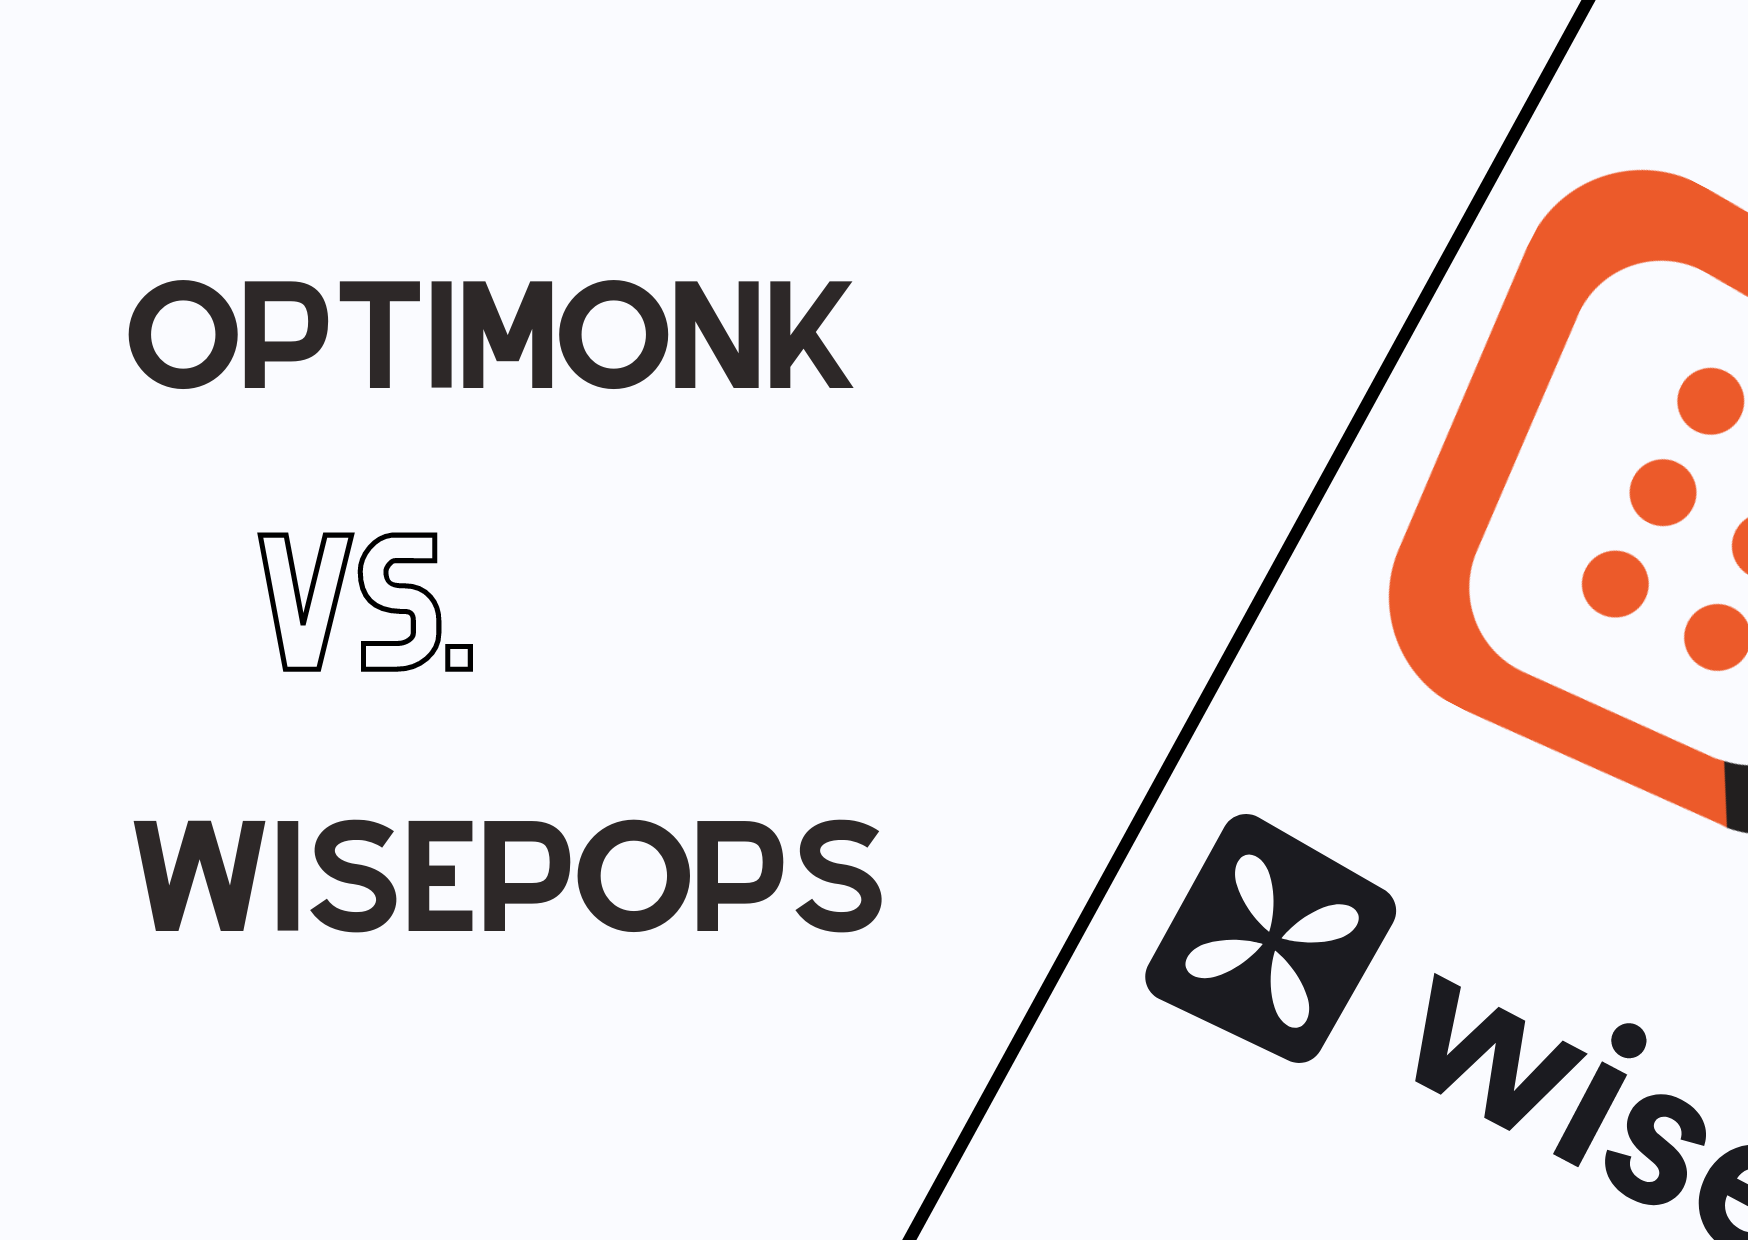 the banner of OptiMonk vs Wisepops with their logos